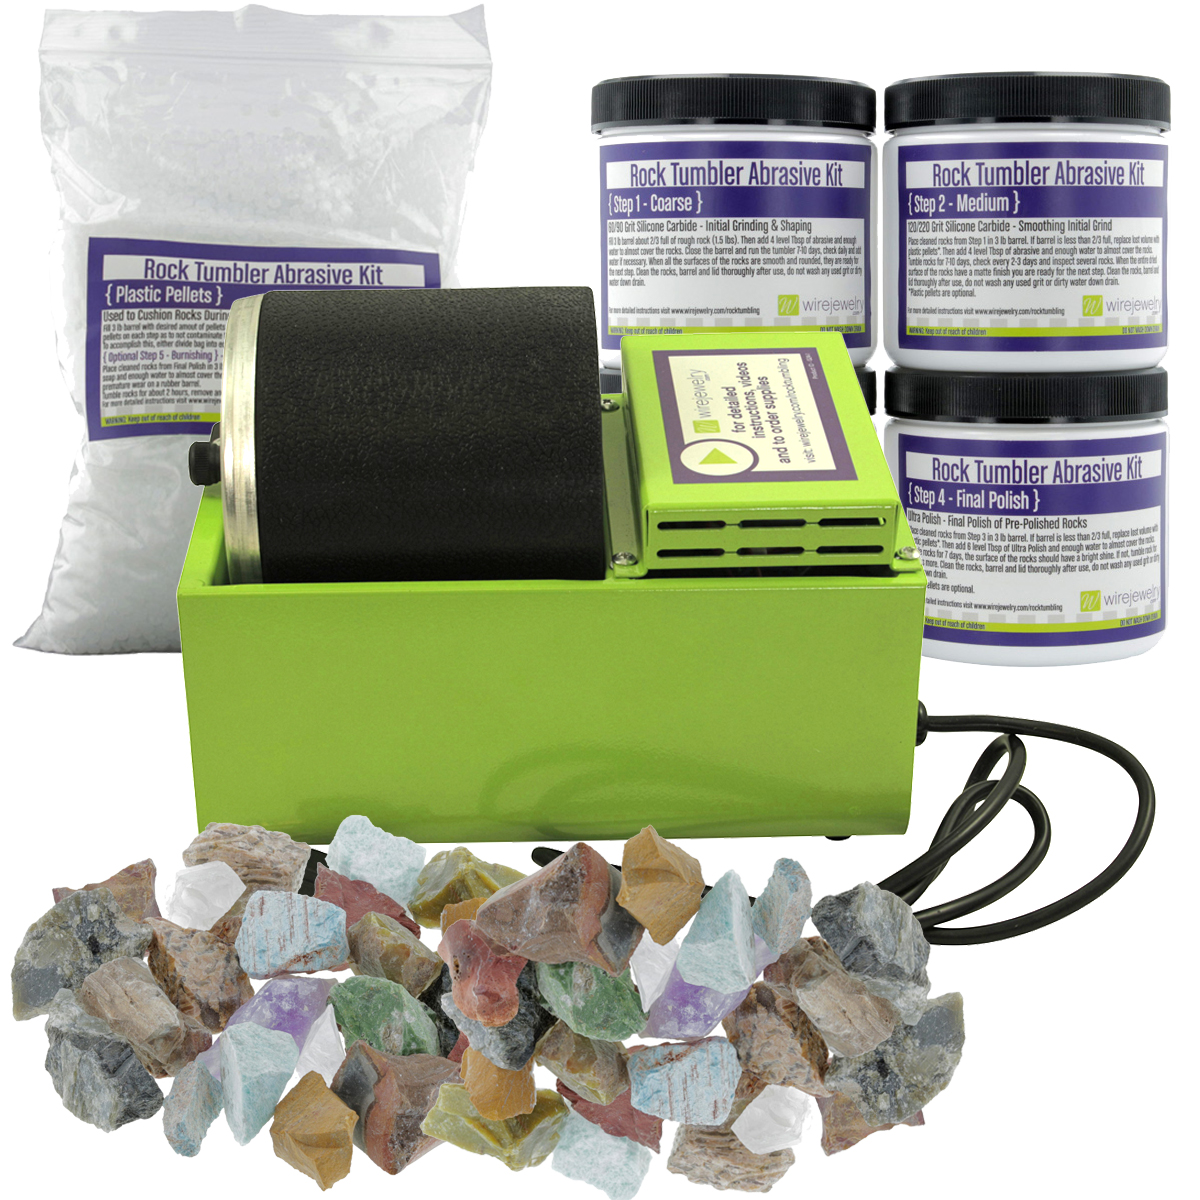 WireJewelry Single Barrel Rotary Rock Tumbler Deluxe Kit, Includes 3 Pounds  of Rough Madagascar Stone Mix and 5 Batches of 4 Step Abrasive Grit and  Polish: Jewelry Making Supplies, Instructions